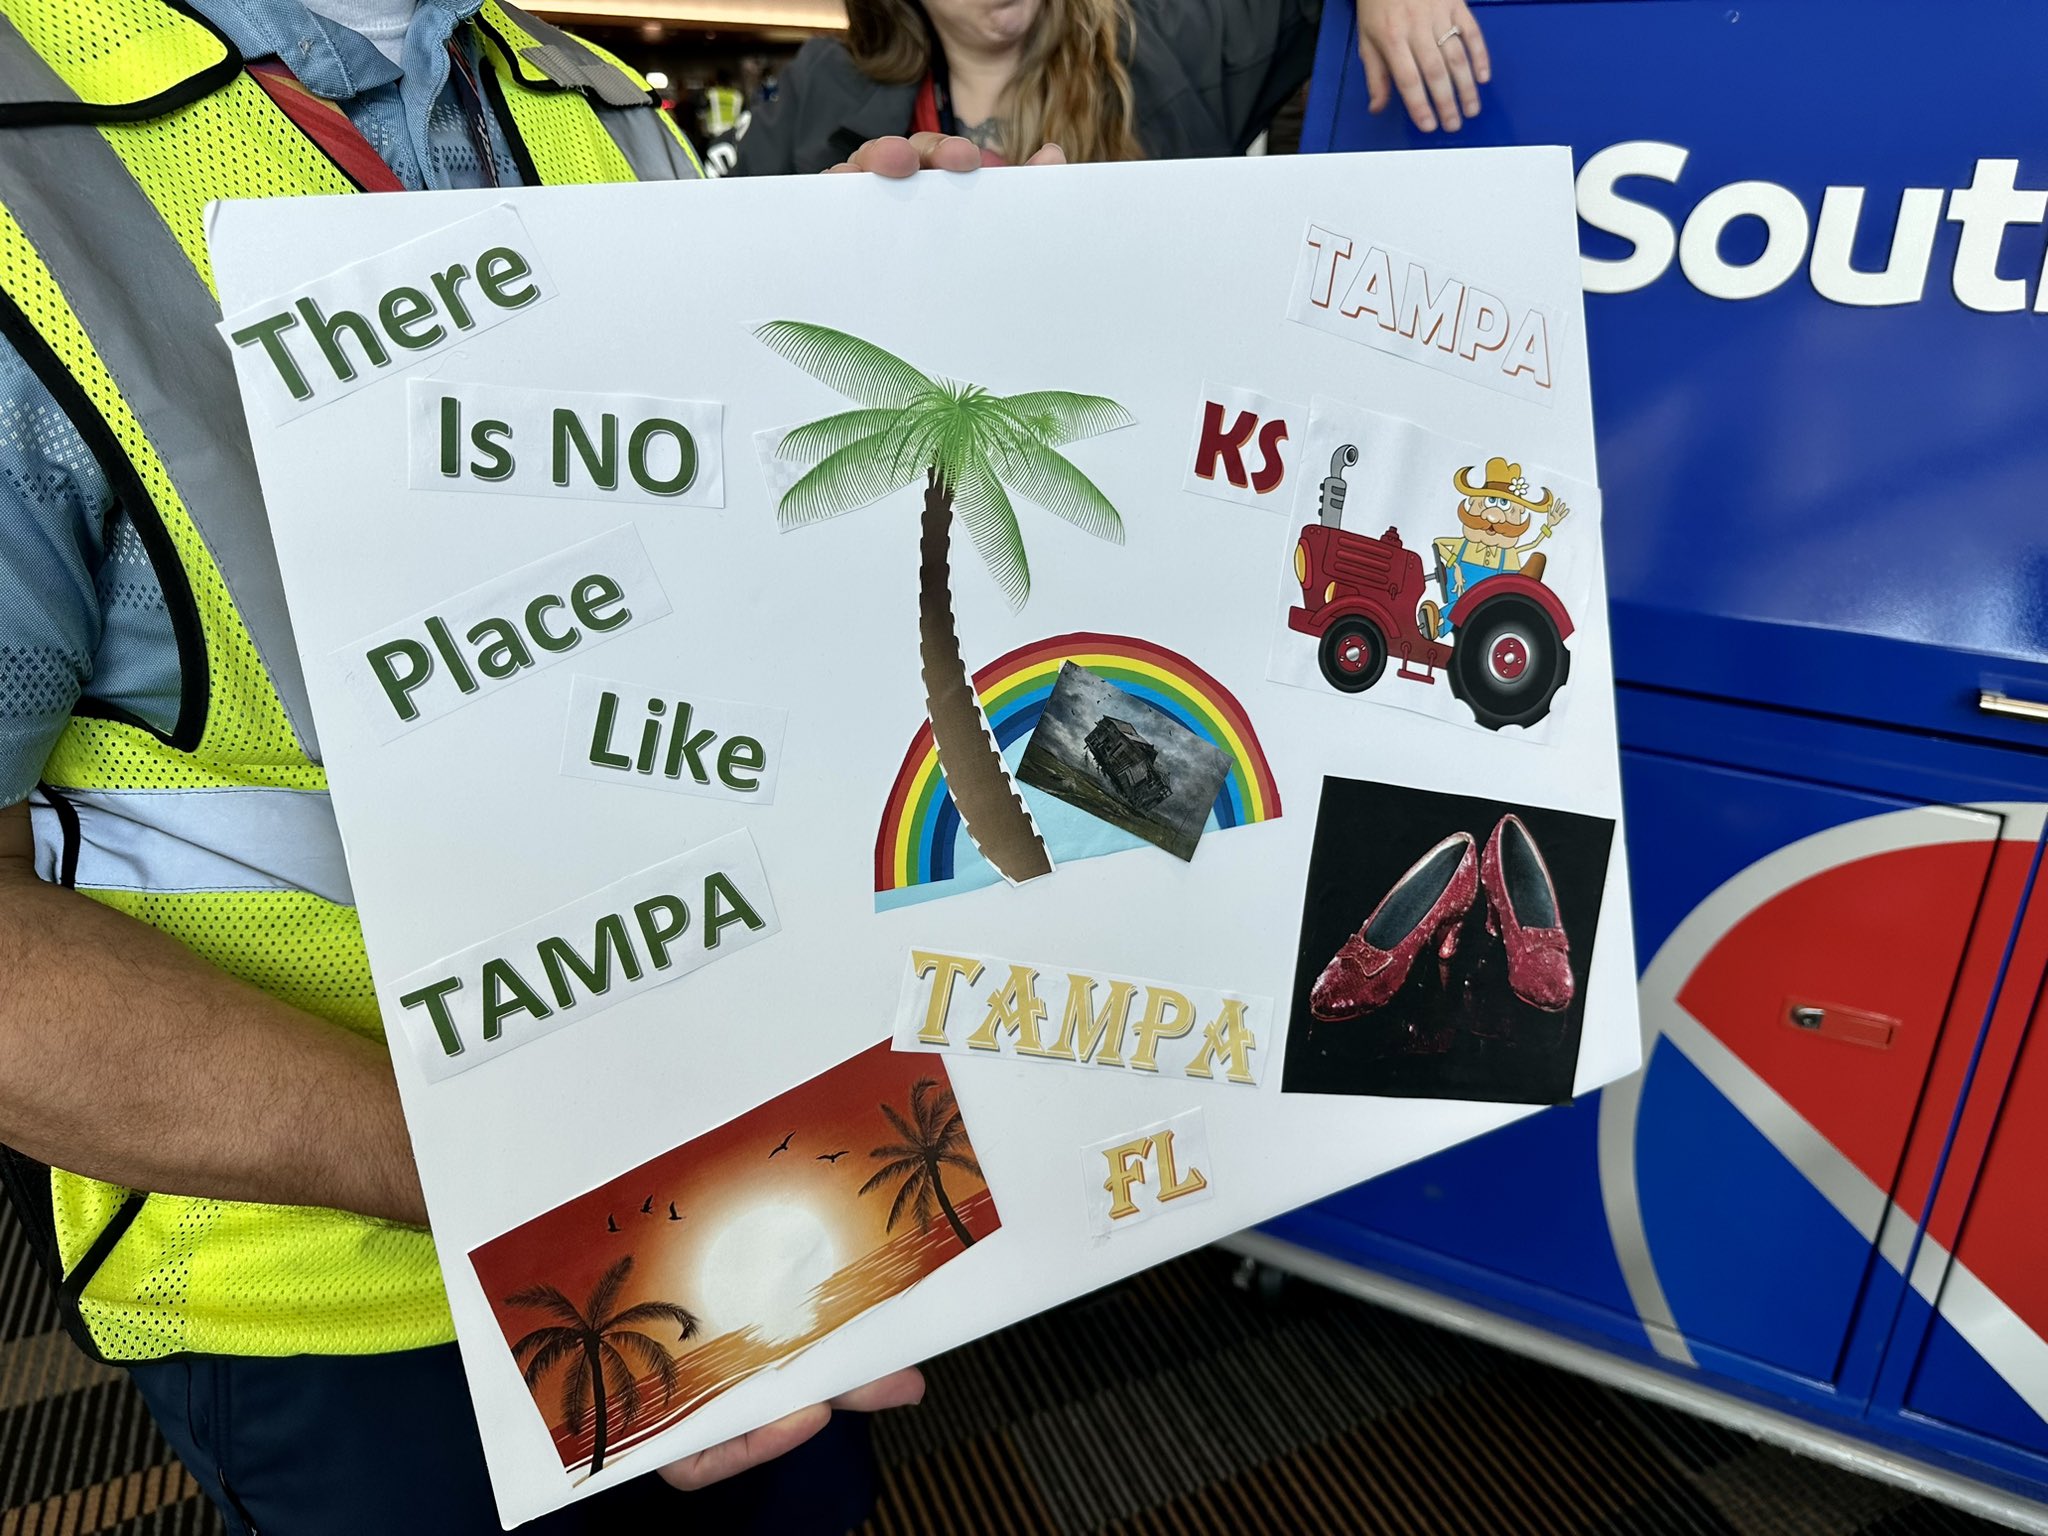 sign that says "there is no place like Tampa"